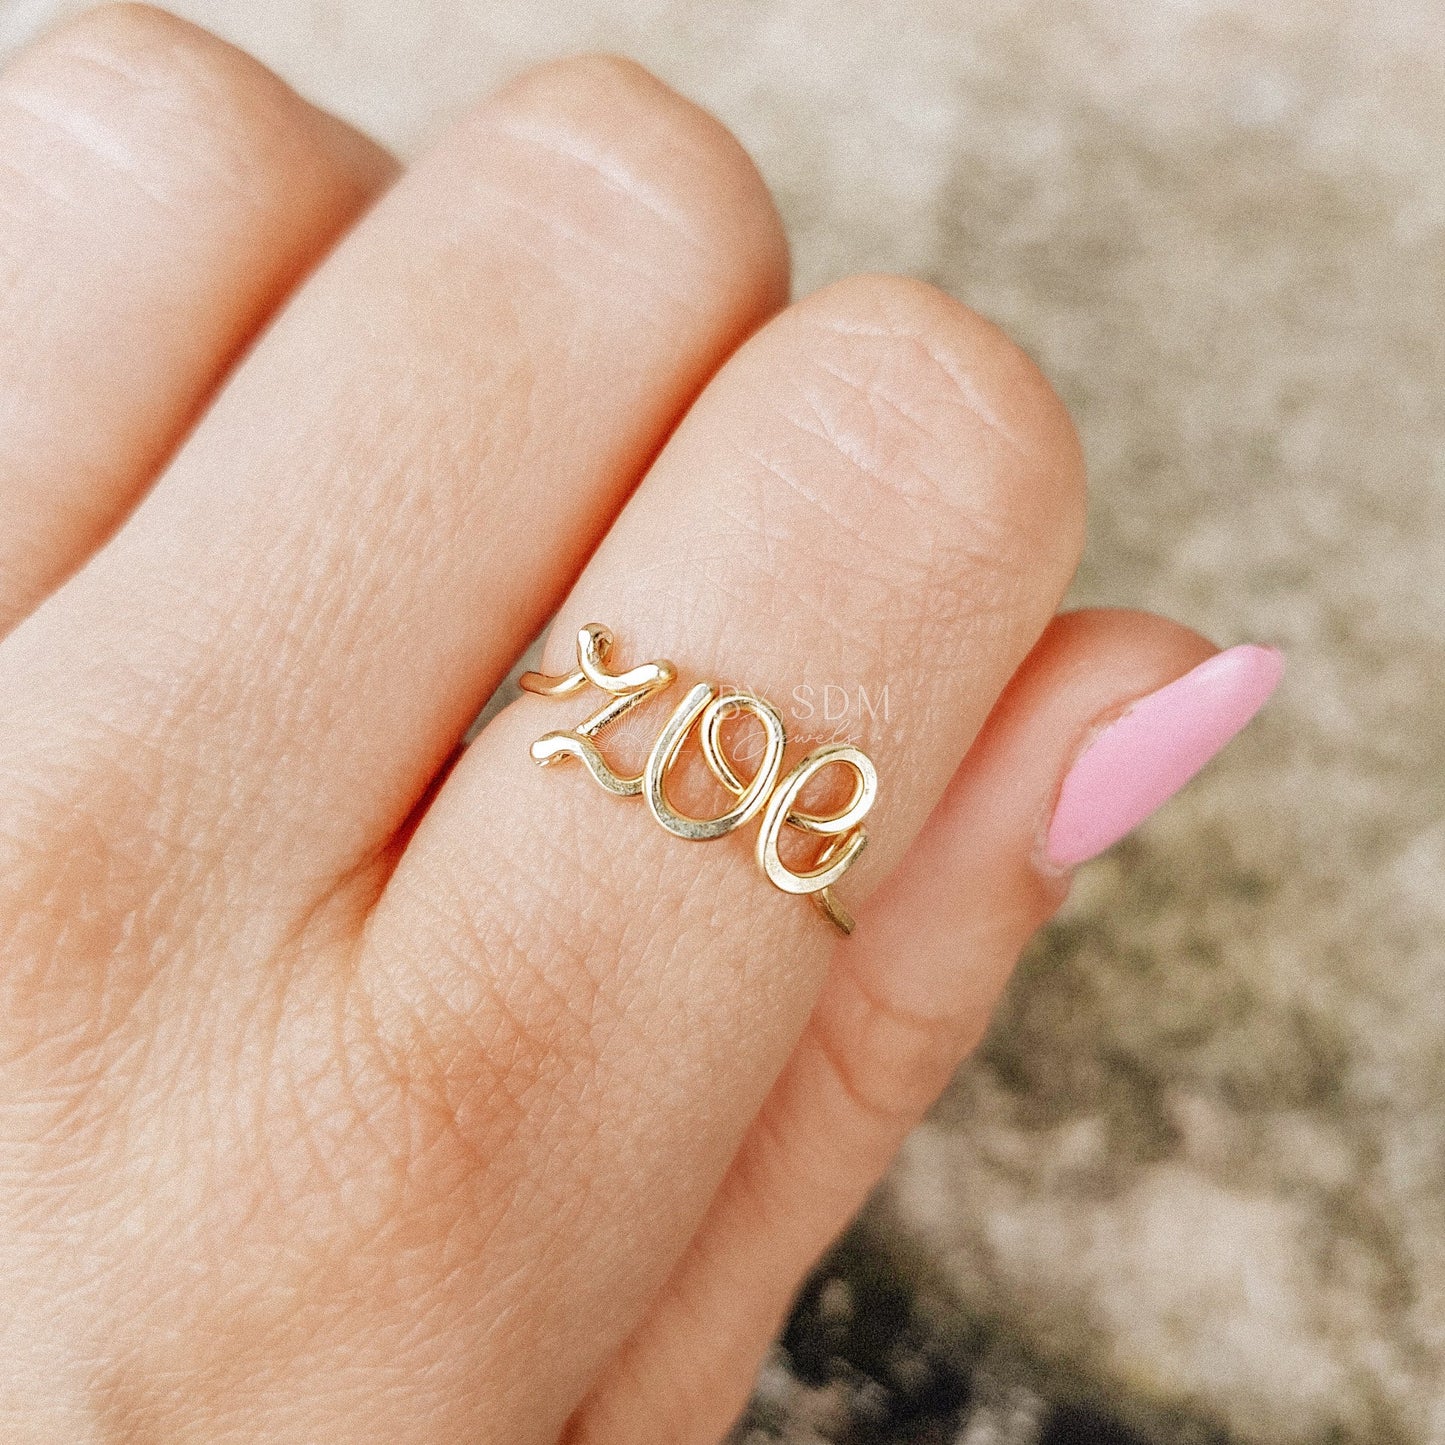 Name Ring • Name Ring in Sterling Silver, Gold and Rose Gold • Personalized Gift For Mom • Best Friend Gift • BYSDMJEWELS